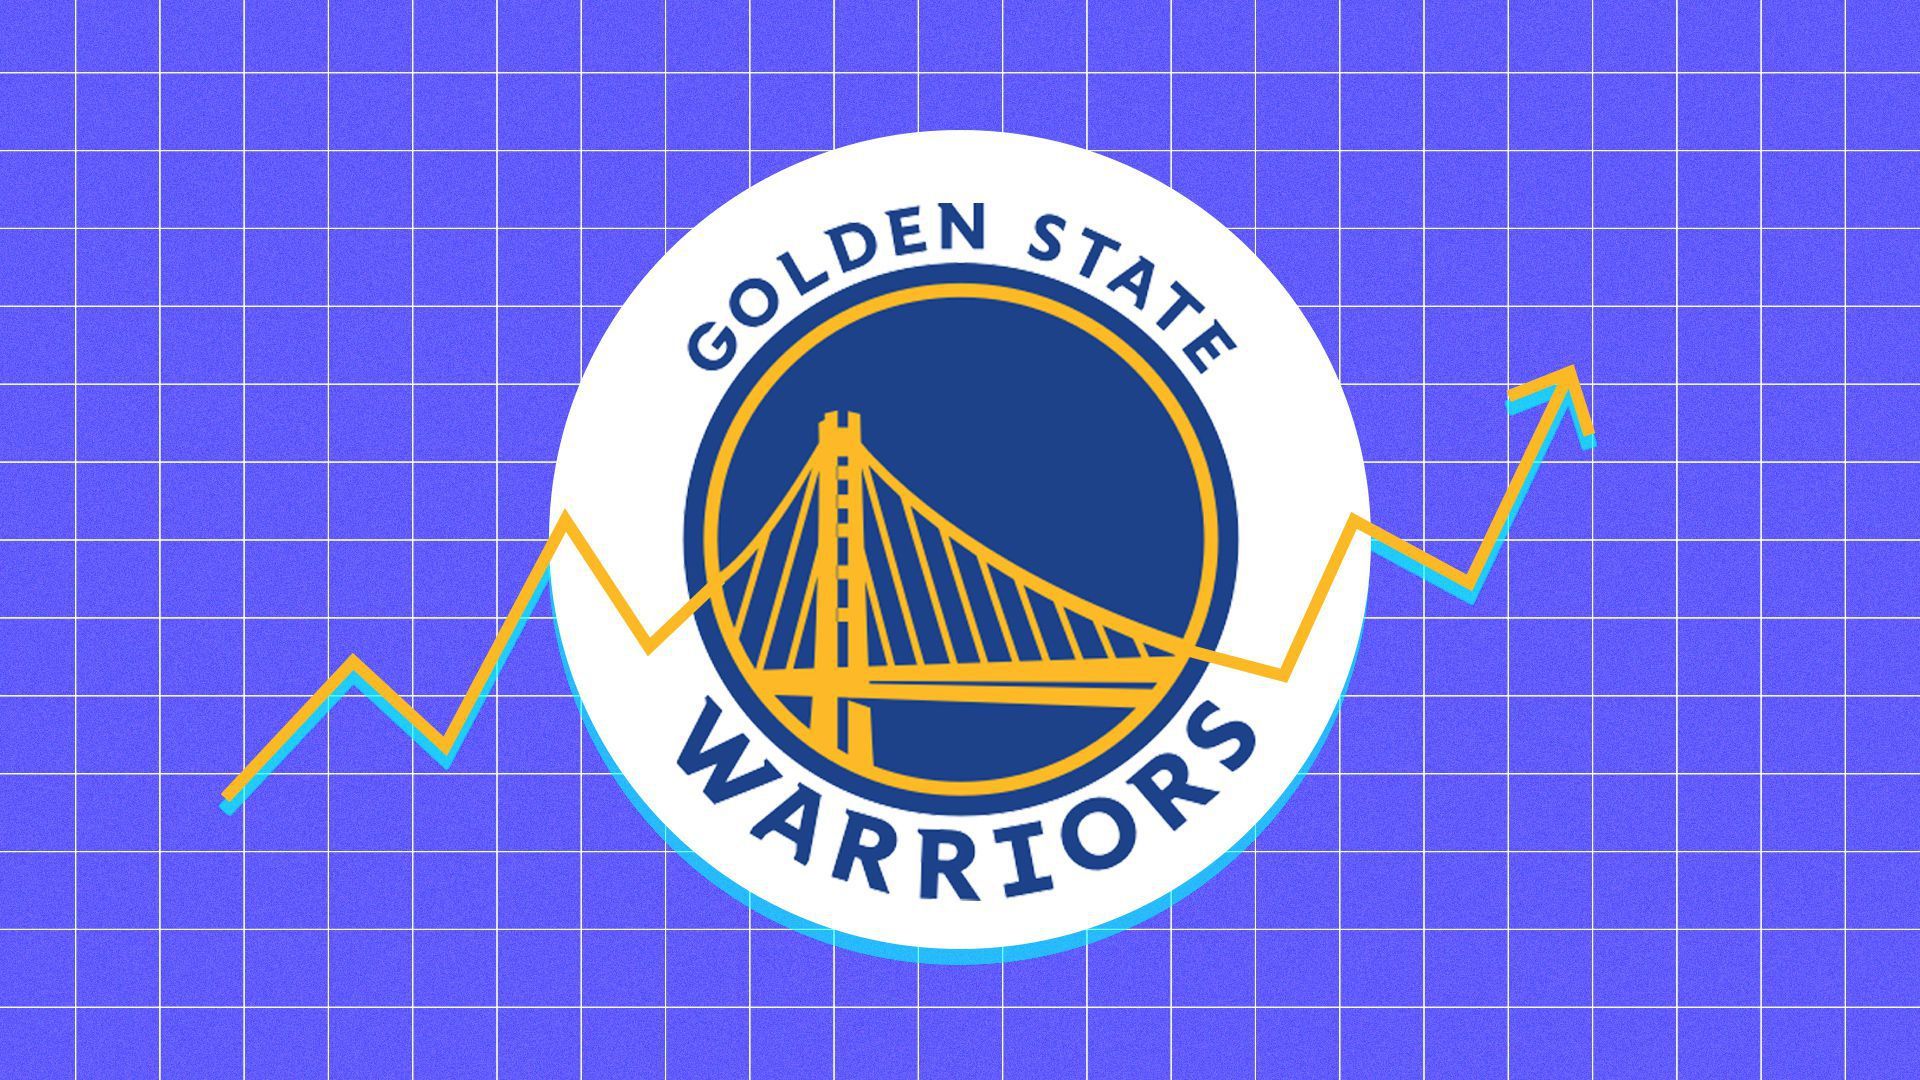 Golden State Warrior symbol with a chart theme.